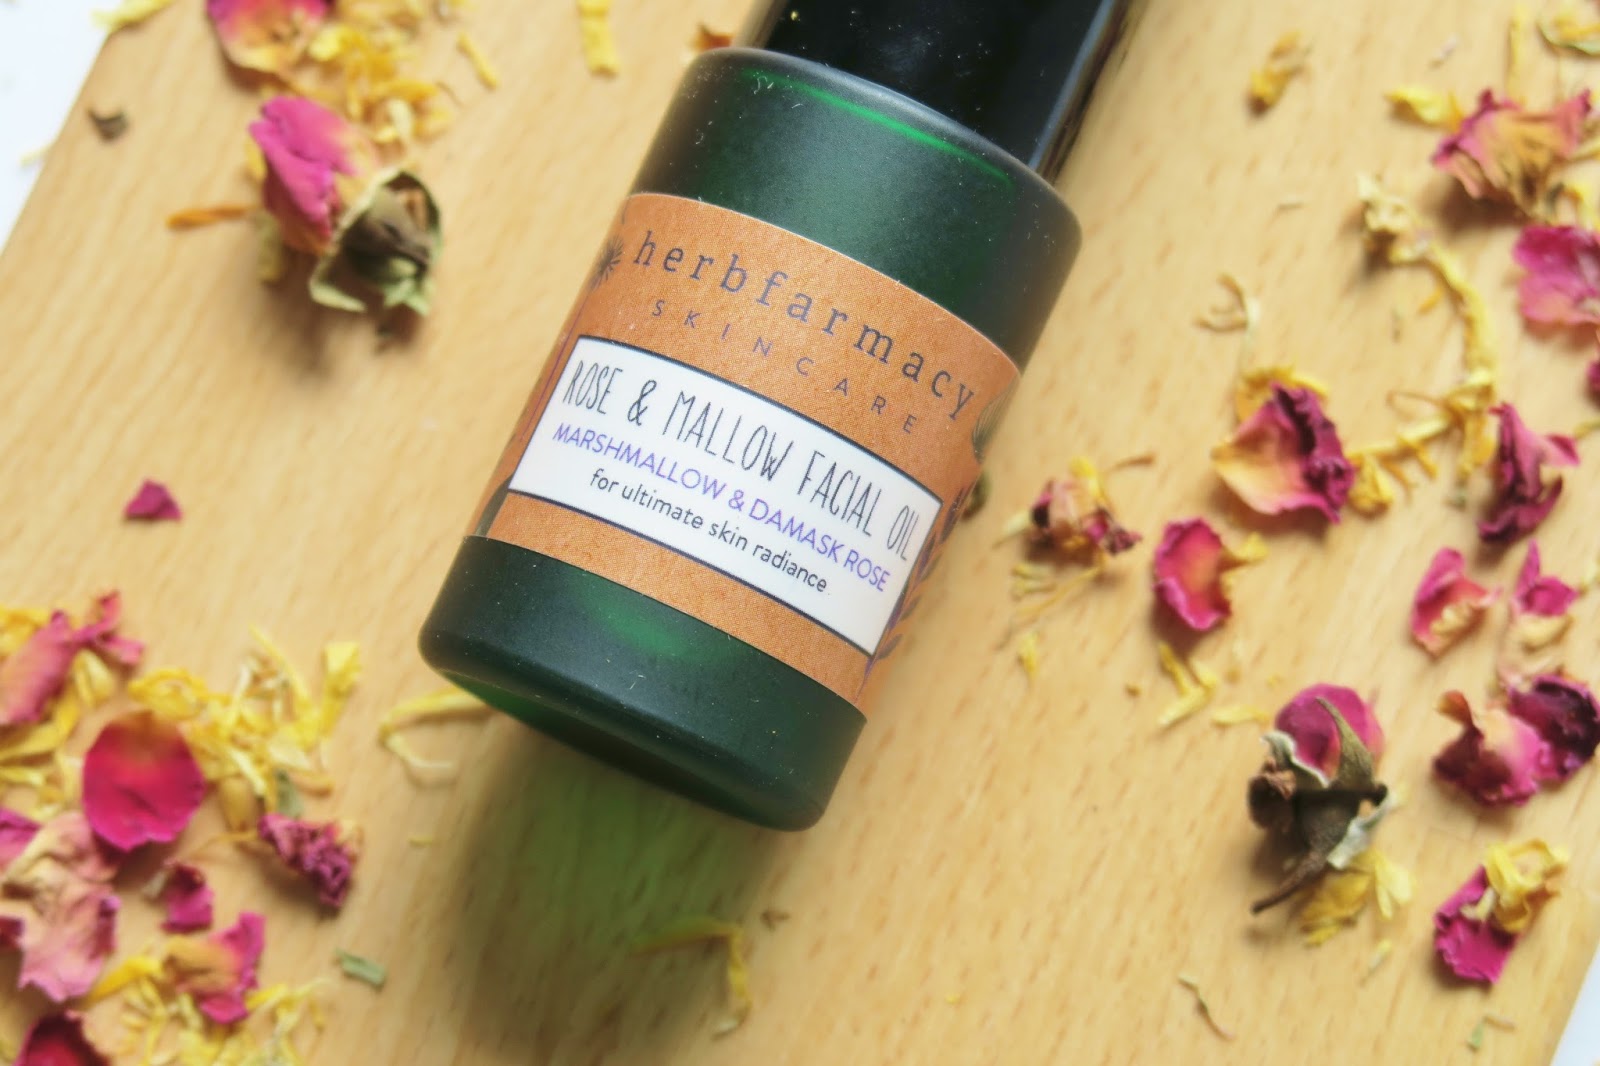 Herbs in Skincare with Herbfarmacy | Organic Beauty Week